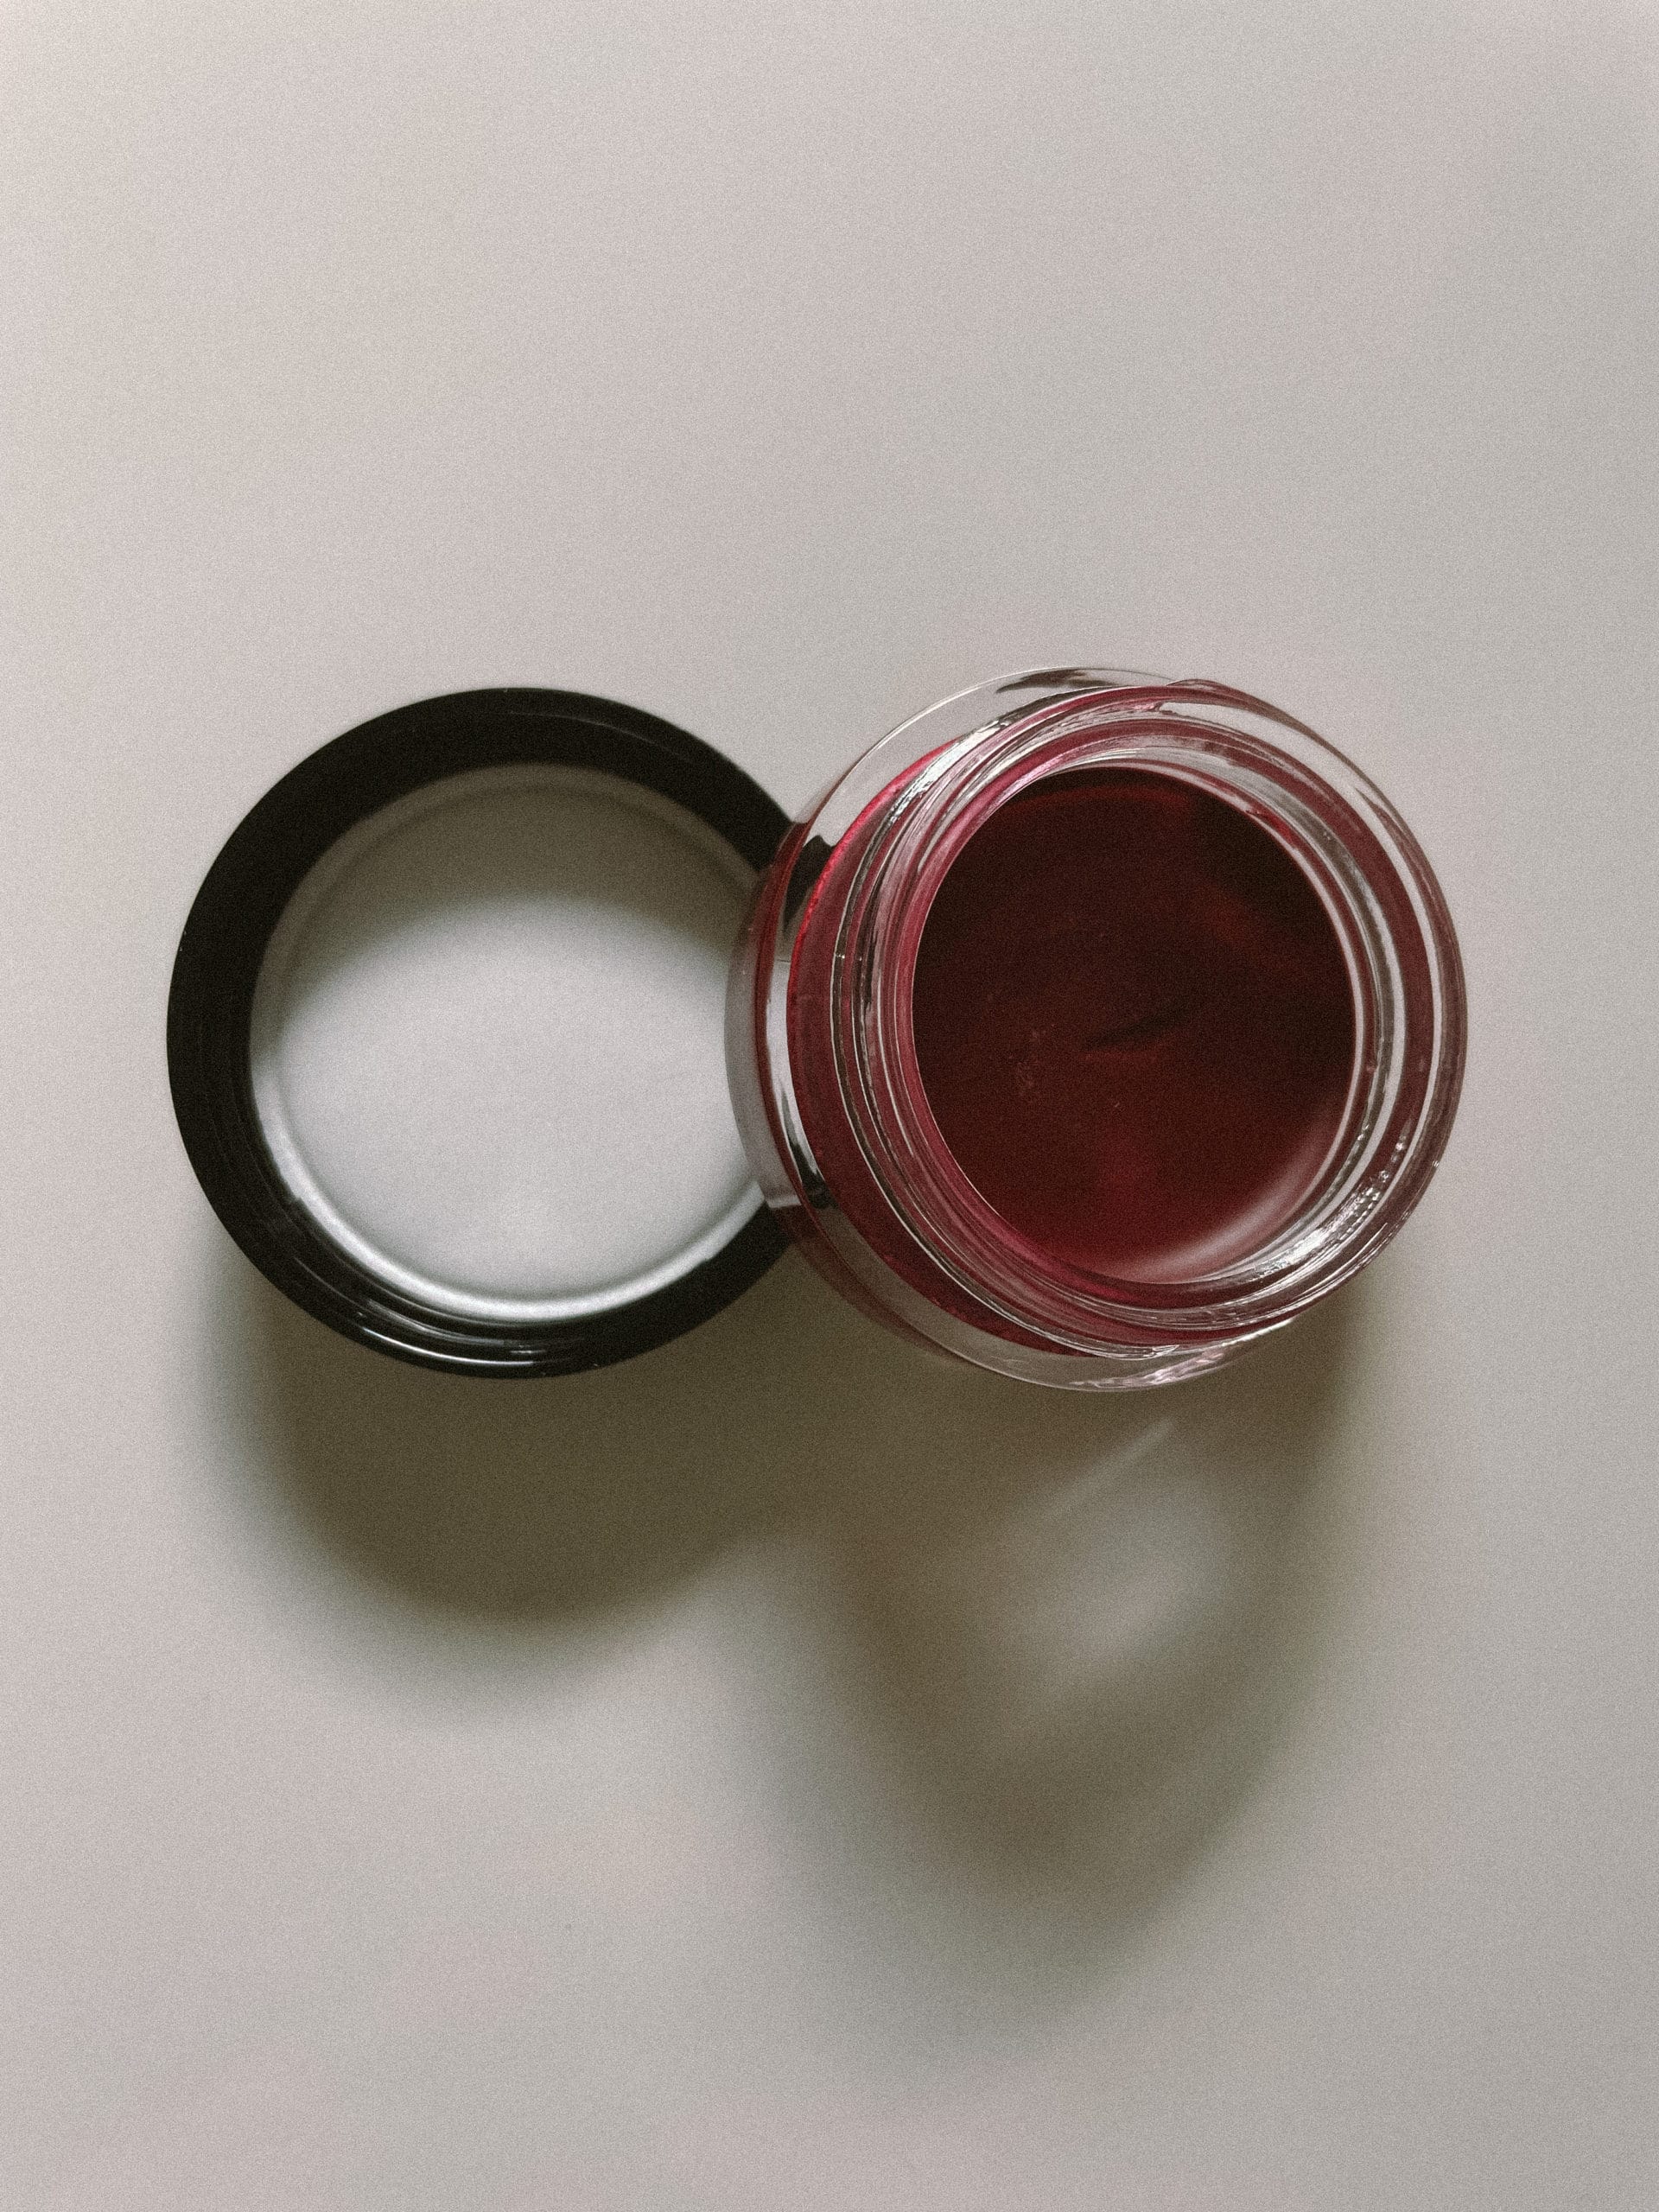 Chanel Lip and Cheek balm honest review